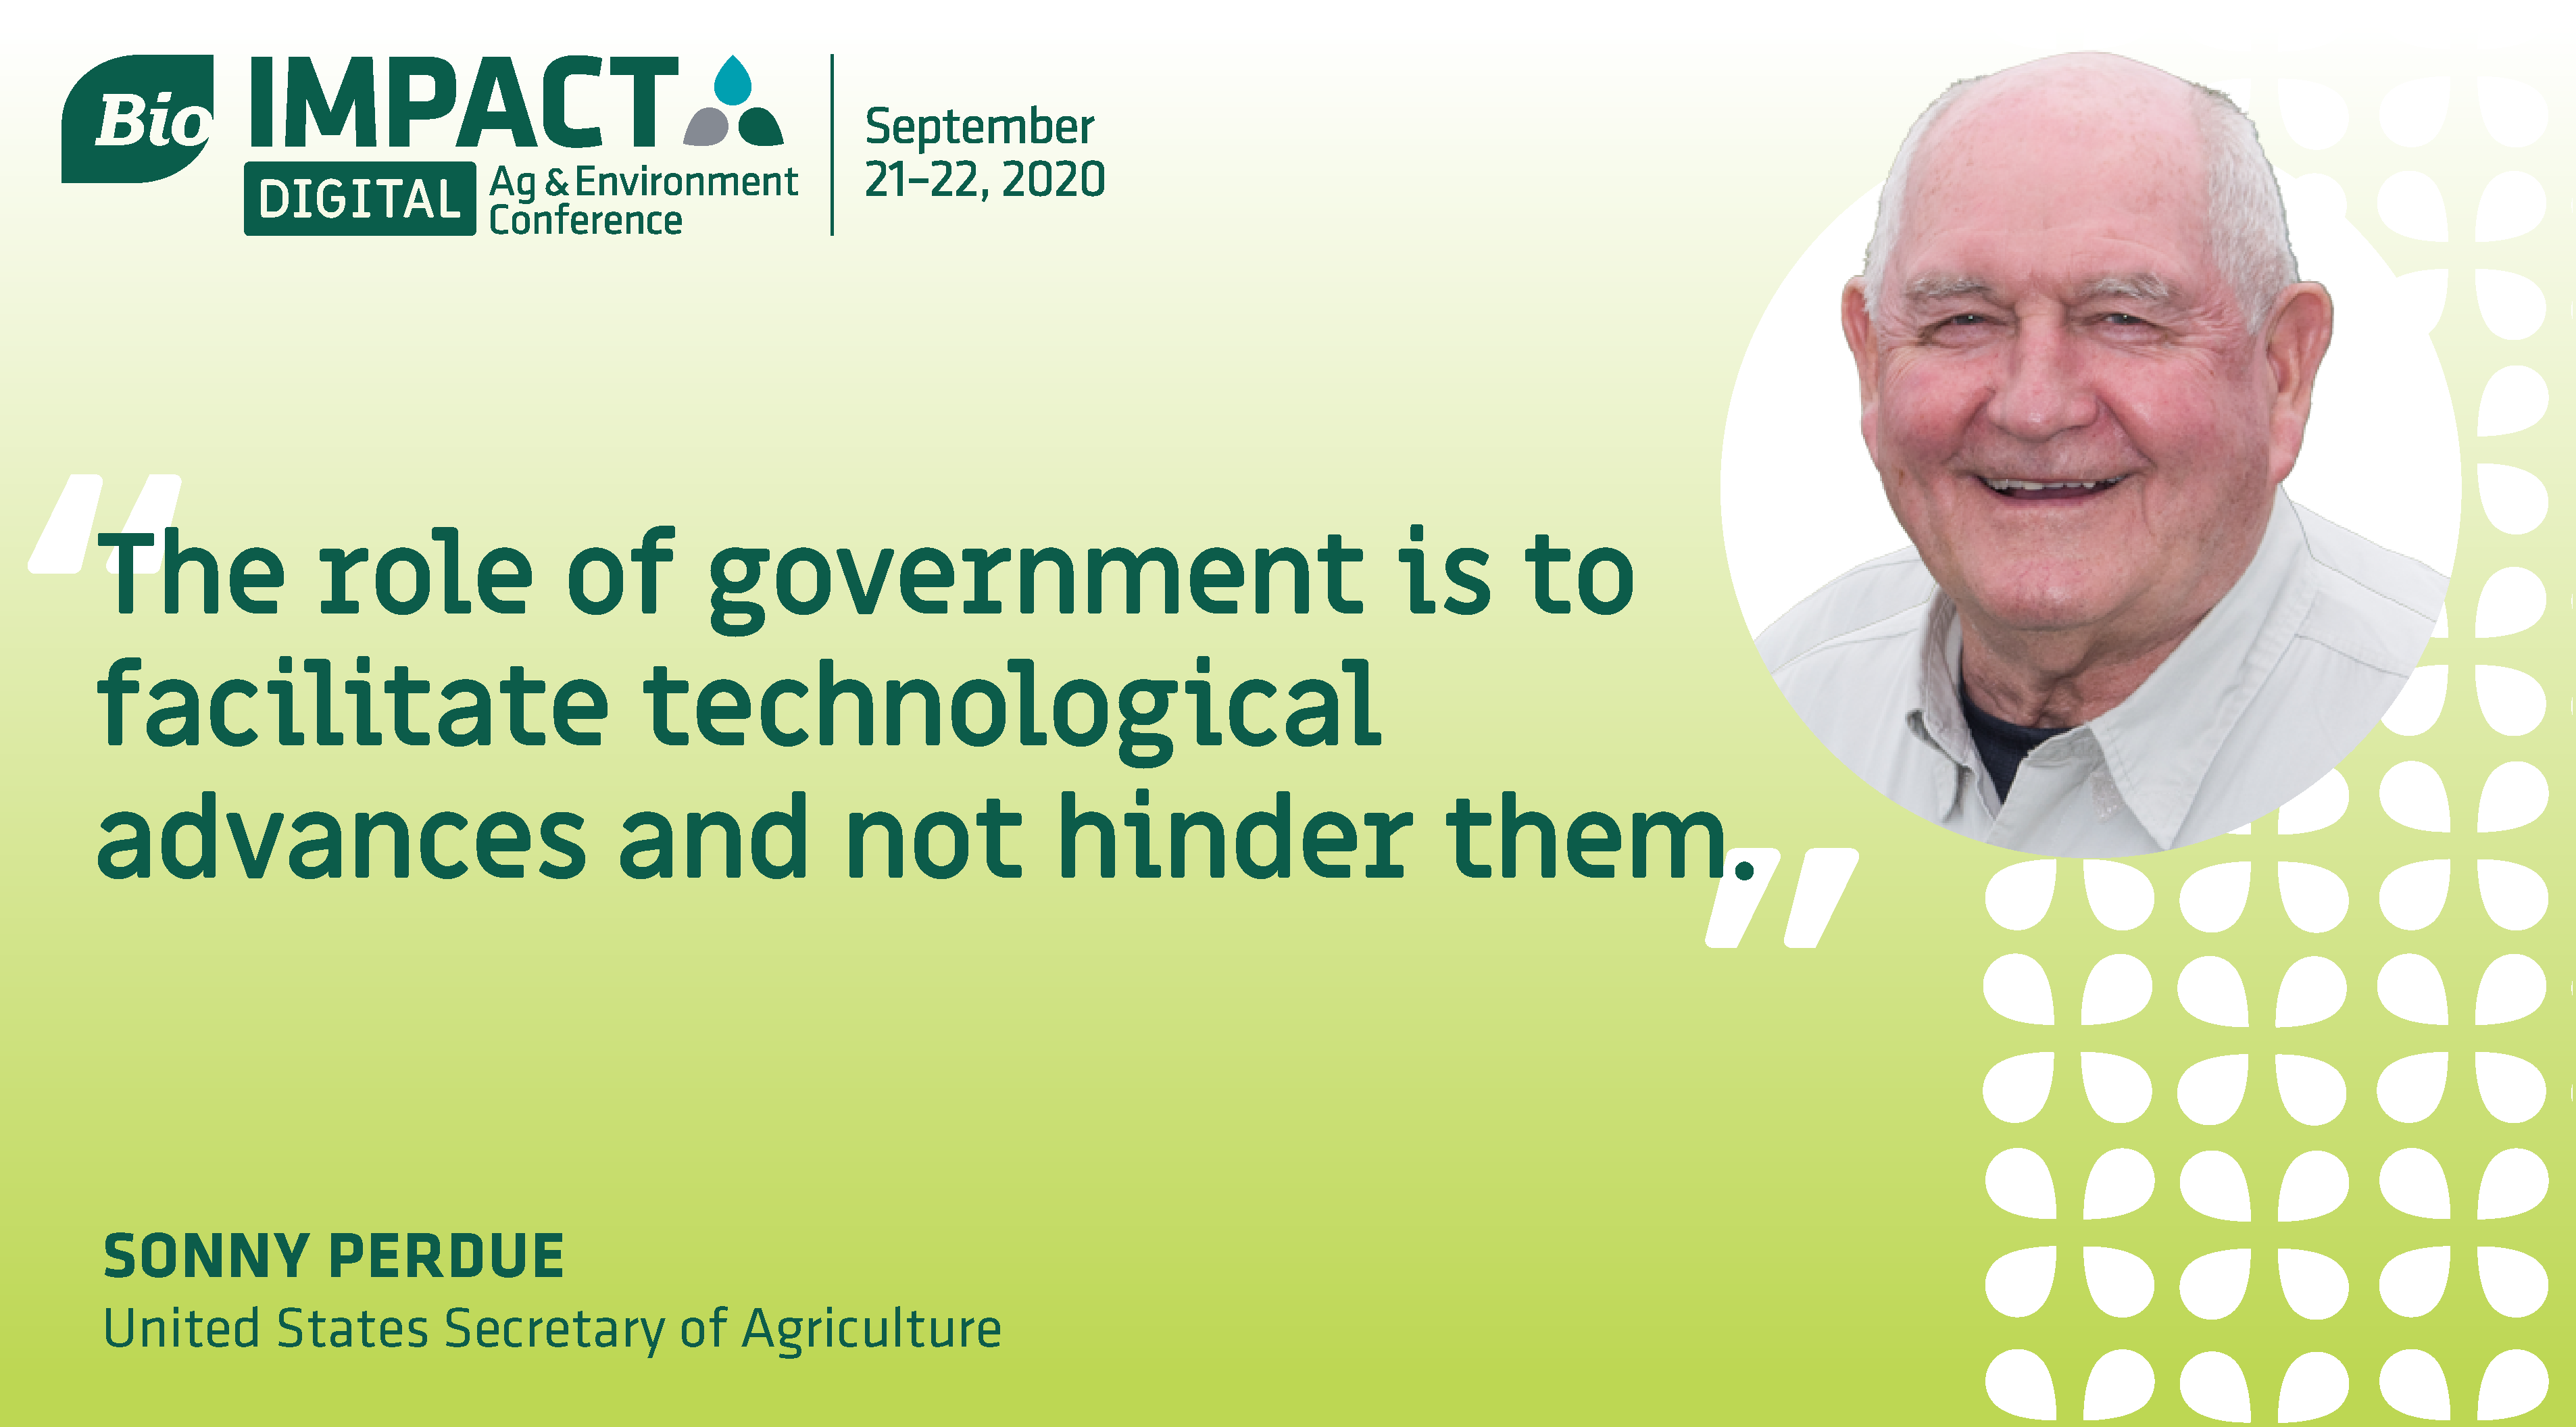 USDA Secretary Sonny Perdue: The role of government is to facilitate technological advances and not hinder them.